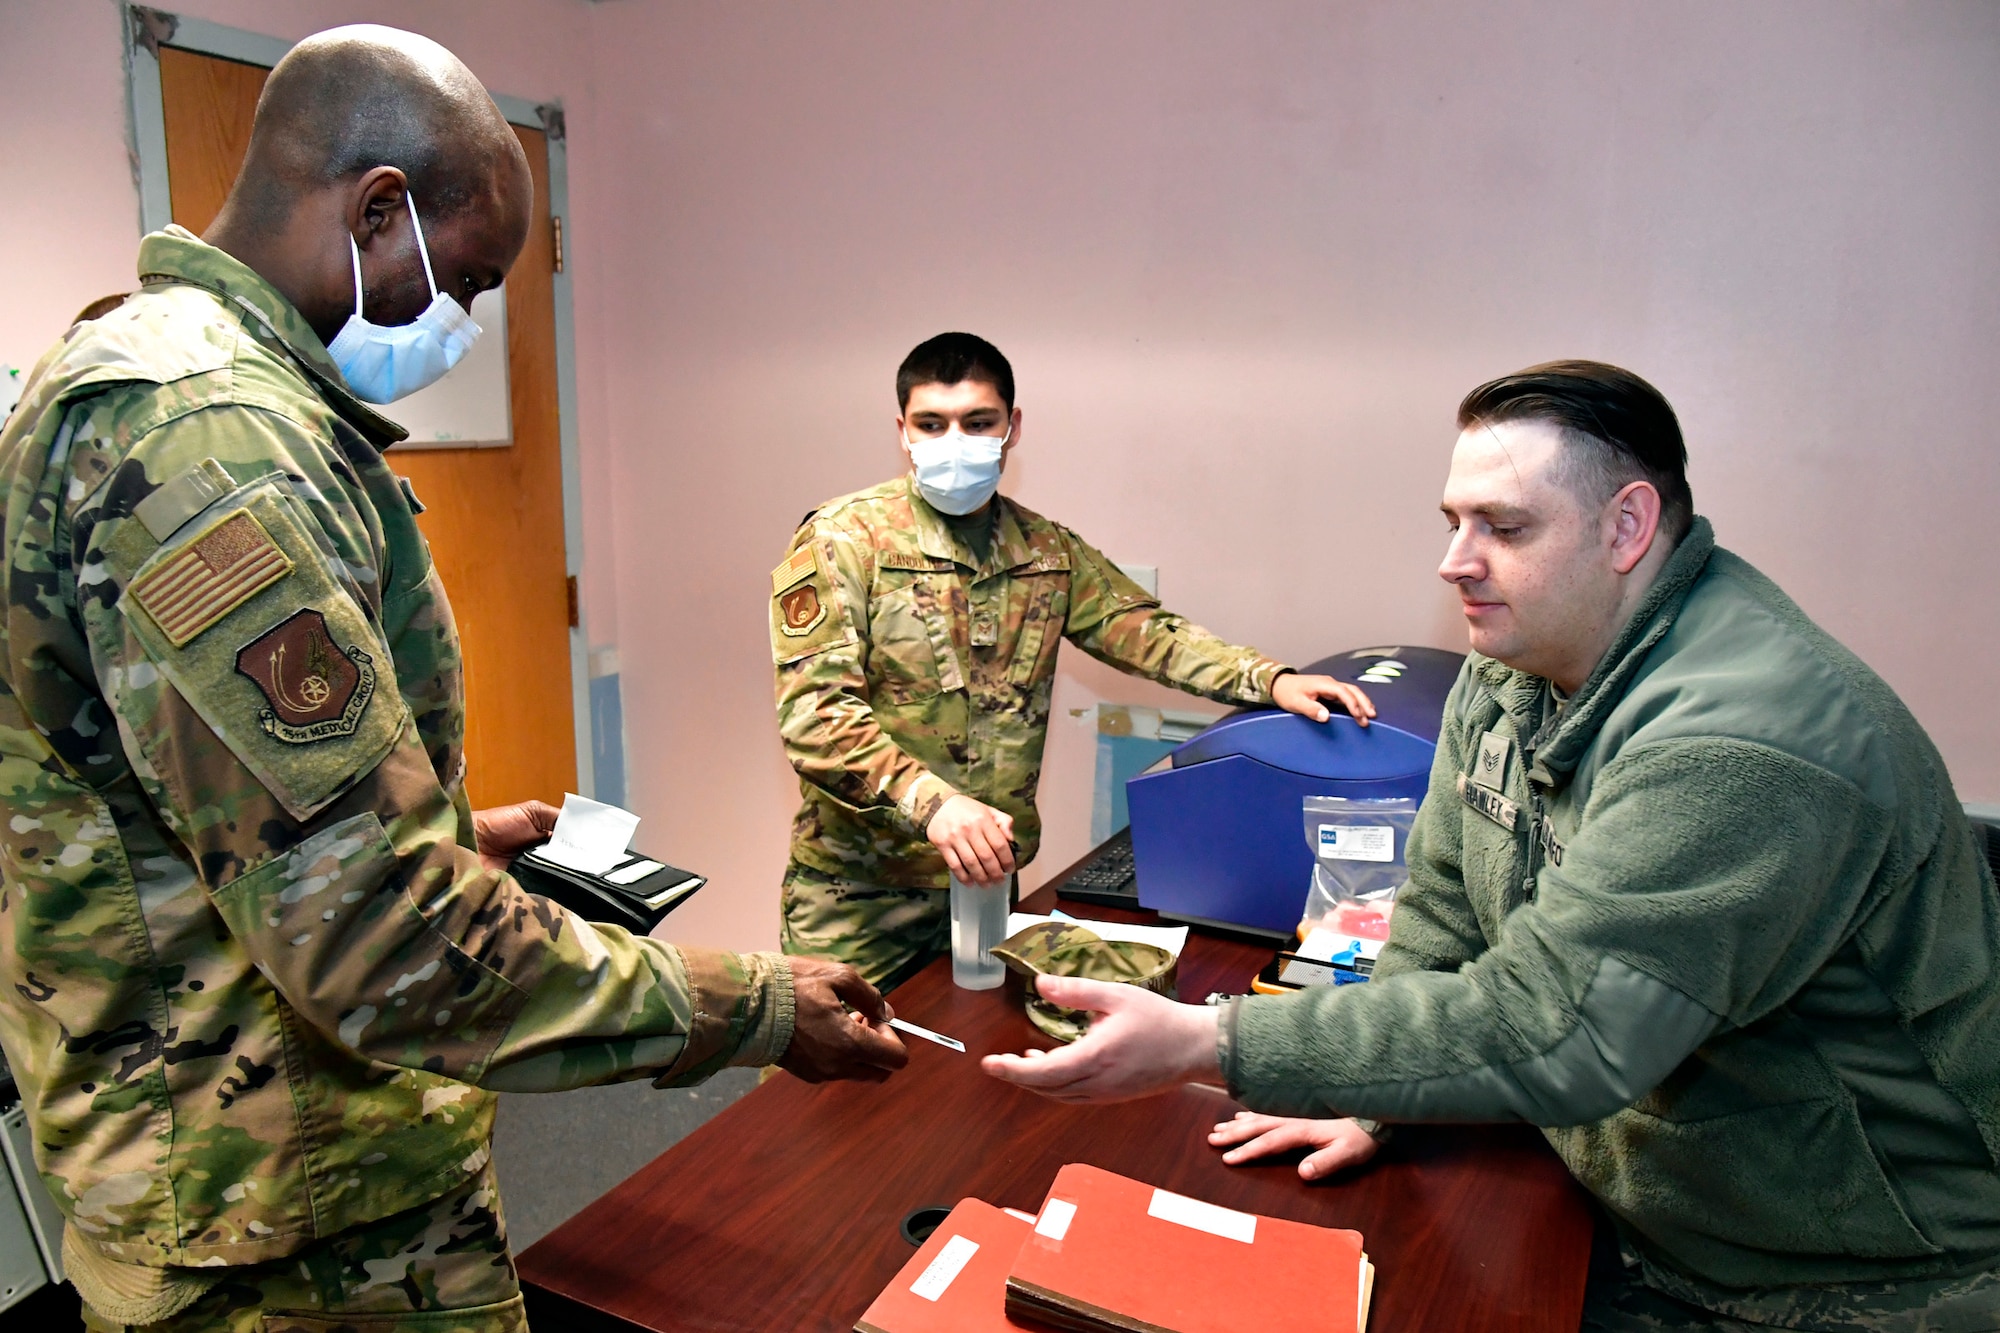 Tech. Sgt. Yves’denis Etiki handing his ID to another Airman during his out processing appointment.